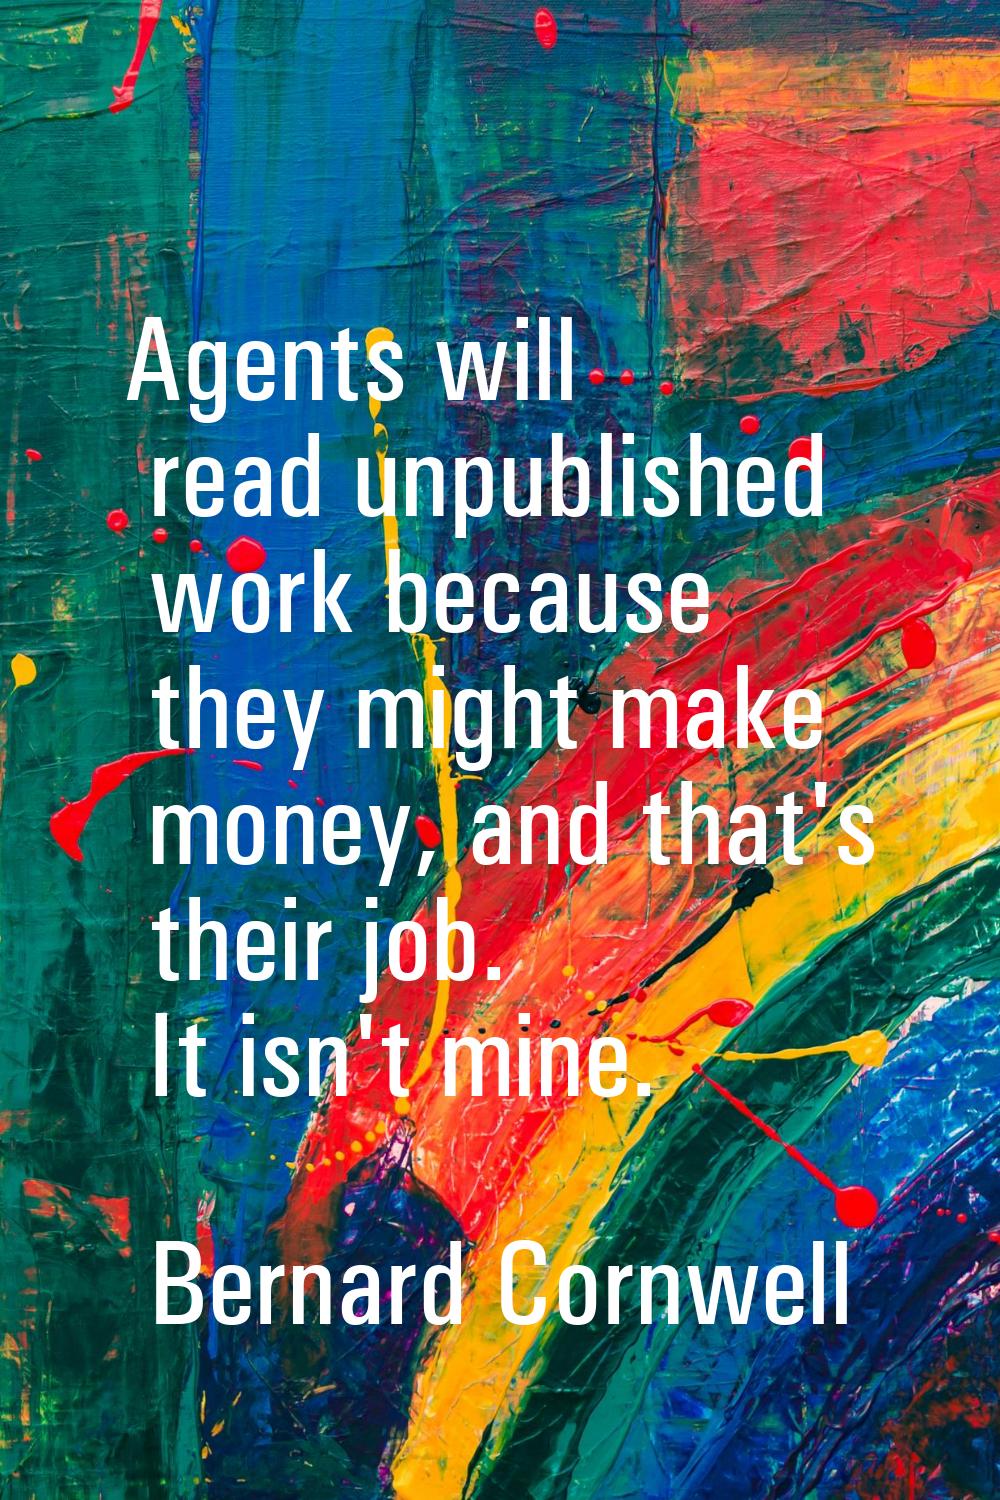 Agents will read unpublished work because they might make money, and that's their job. It isn't min